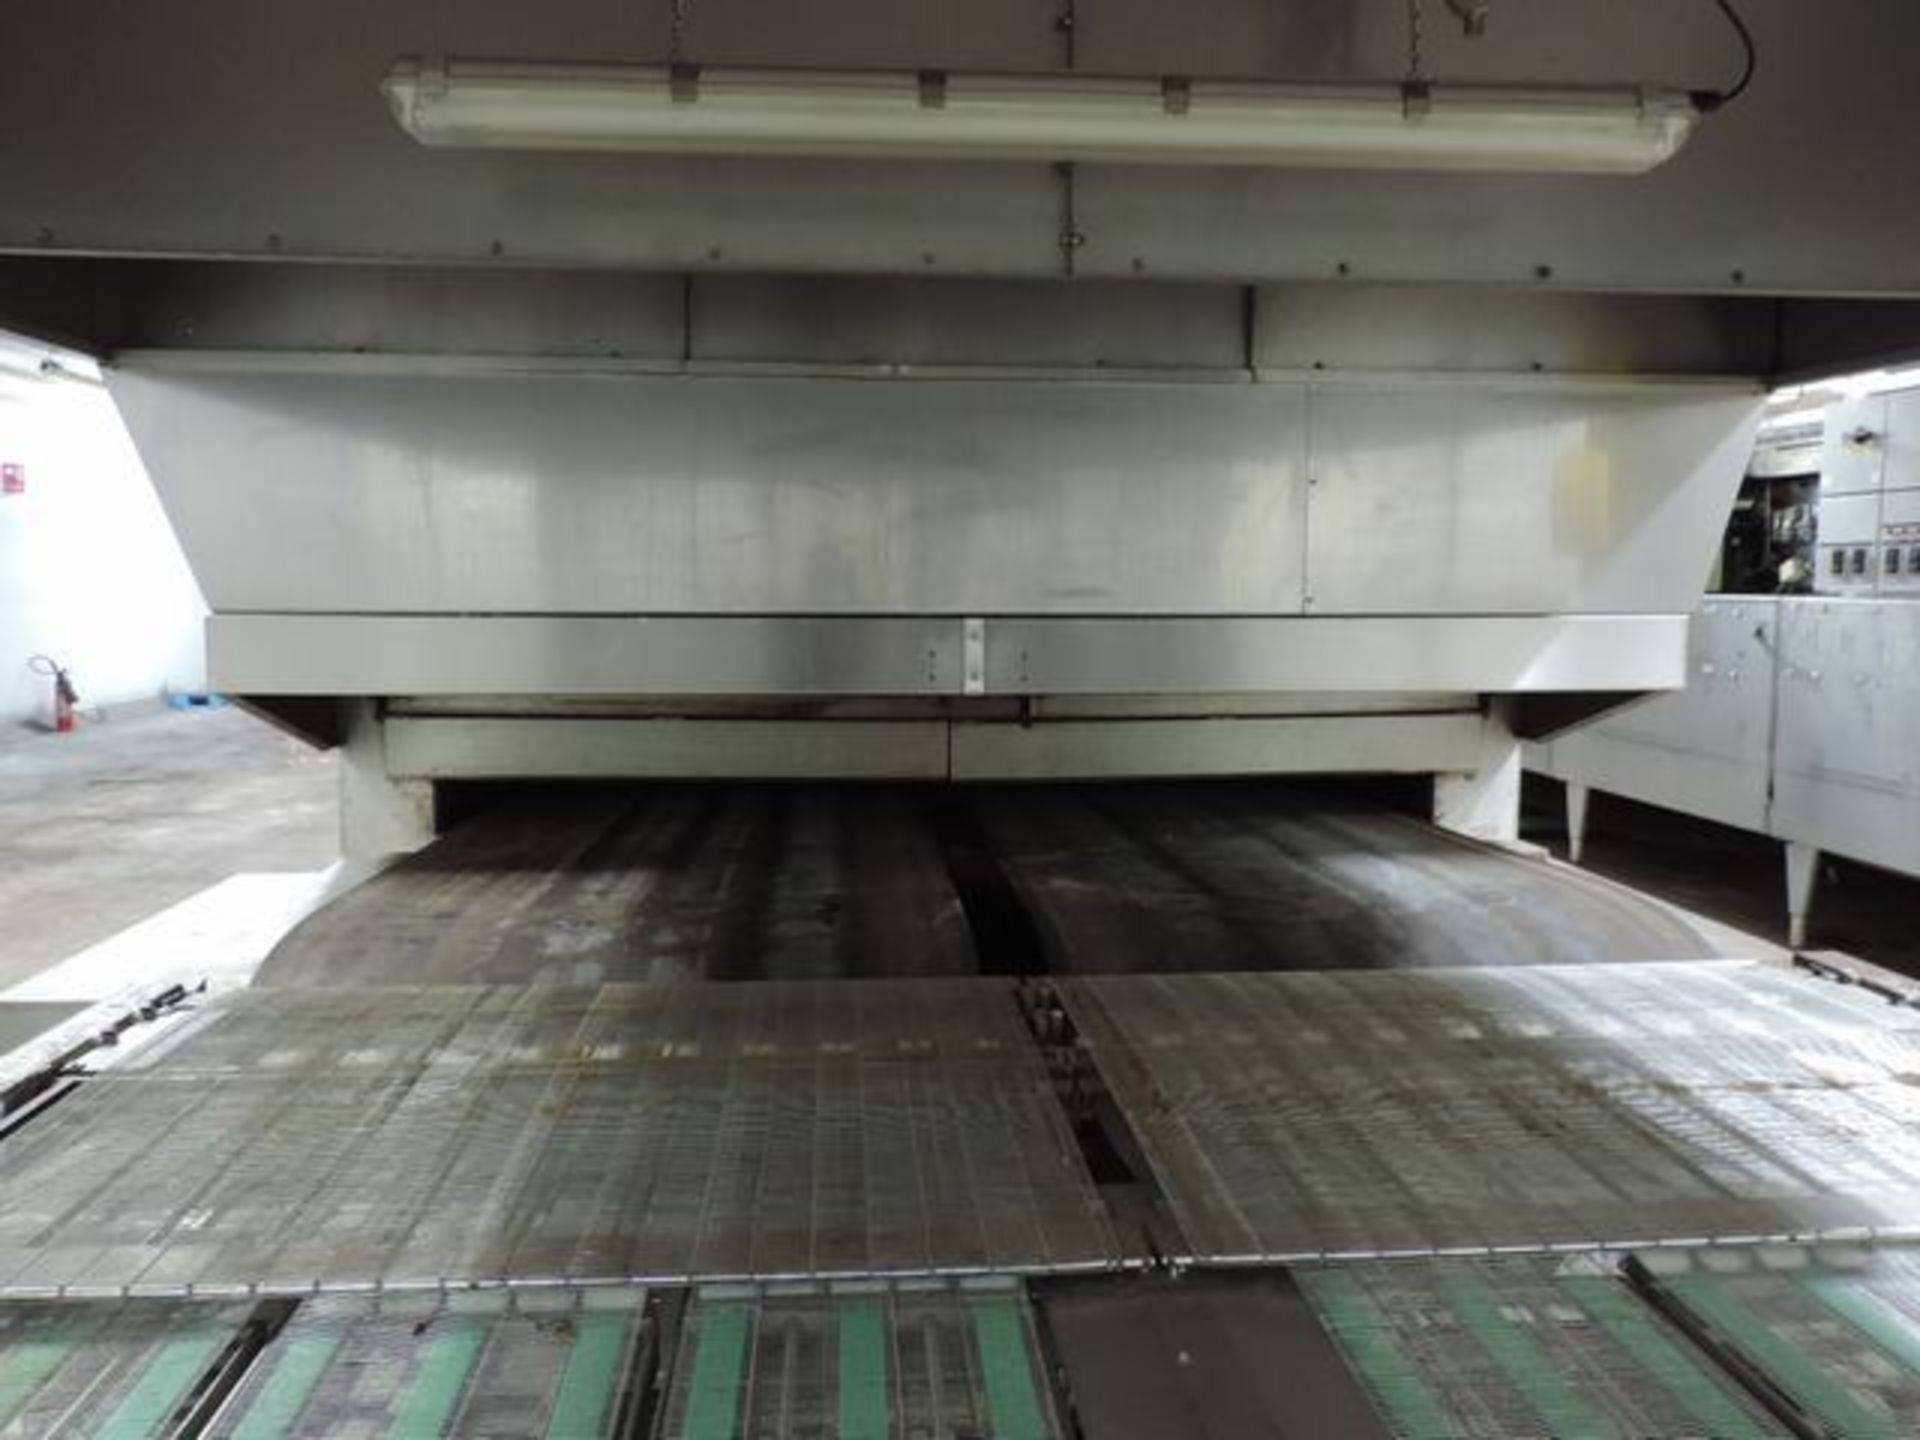 Meincke dual band oven, stainless construction, 6-zone gas fired, approx 31.5 m long, with (2) - Image 5 of 5